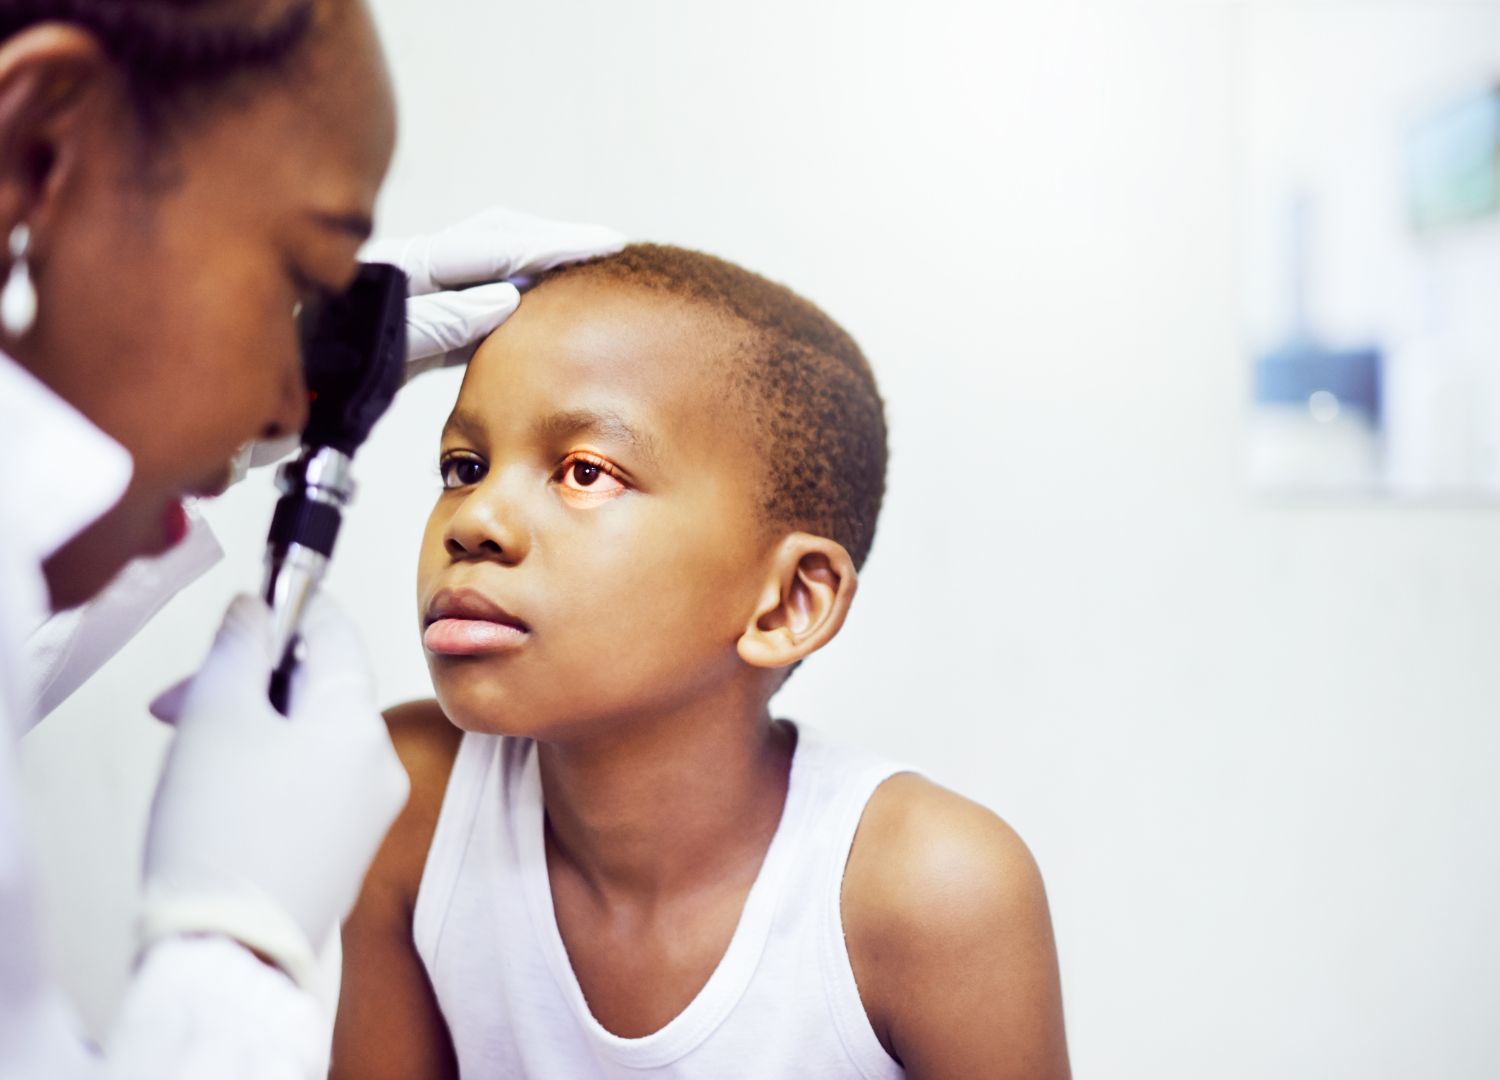 "The eyes don't lie: Catching health  issues early with routine eye checkups"